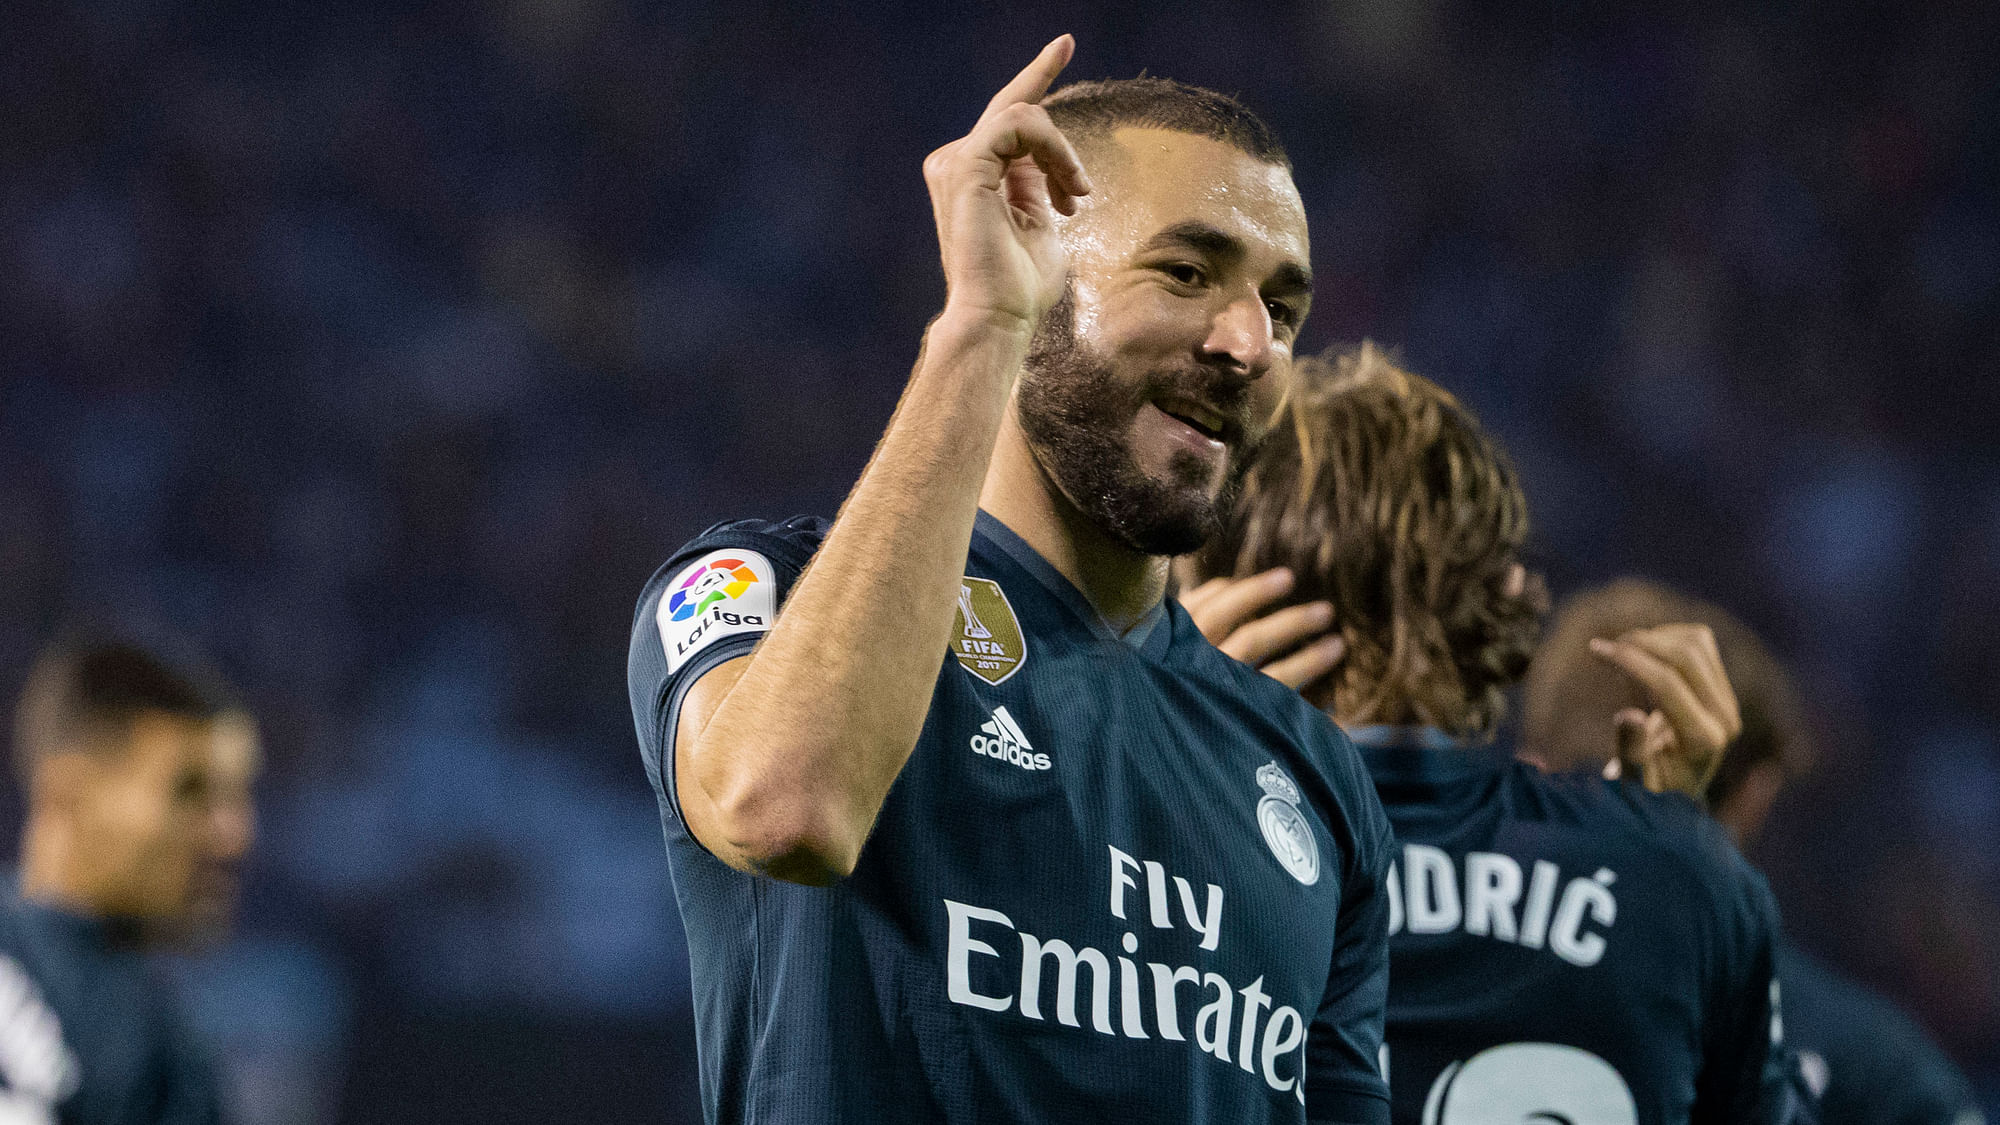 Karim Benzema made an unflattering comment about fellow forward Olivier Giroud, comparing himself to a Formula One car and his former France teammate to a go-kart.